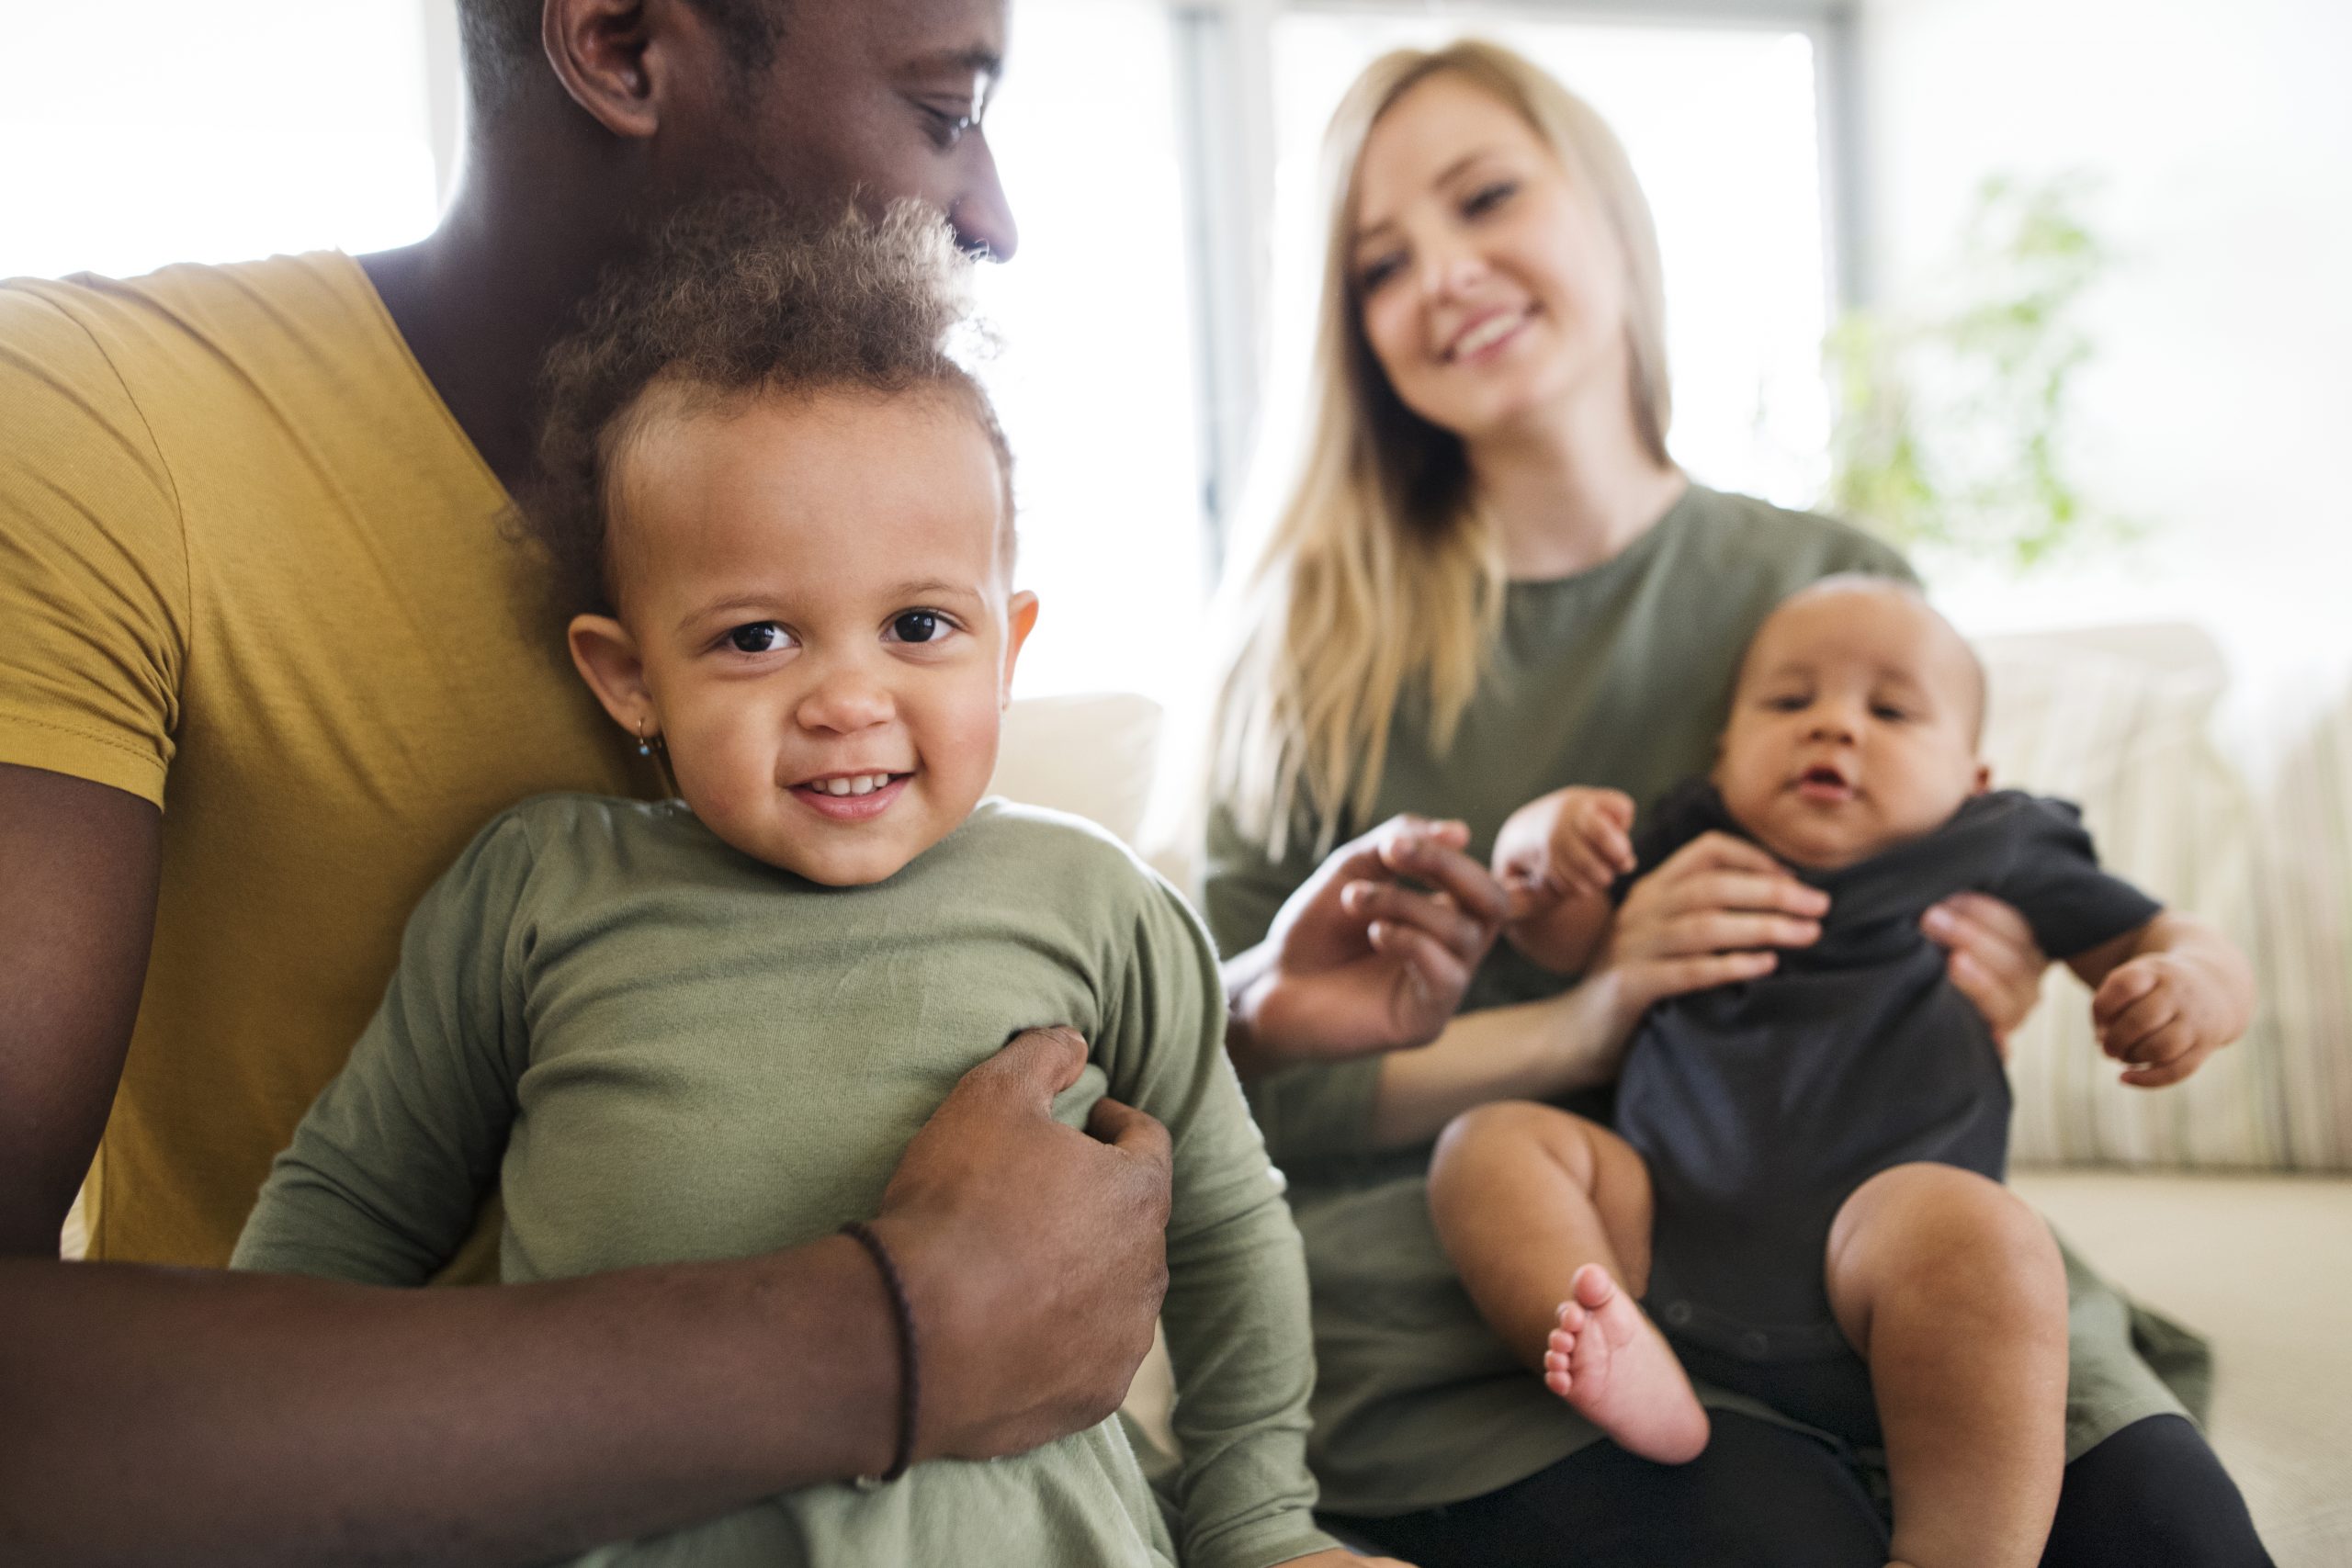 What Homeowners Should Think About When Becoming a Parent